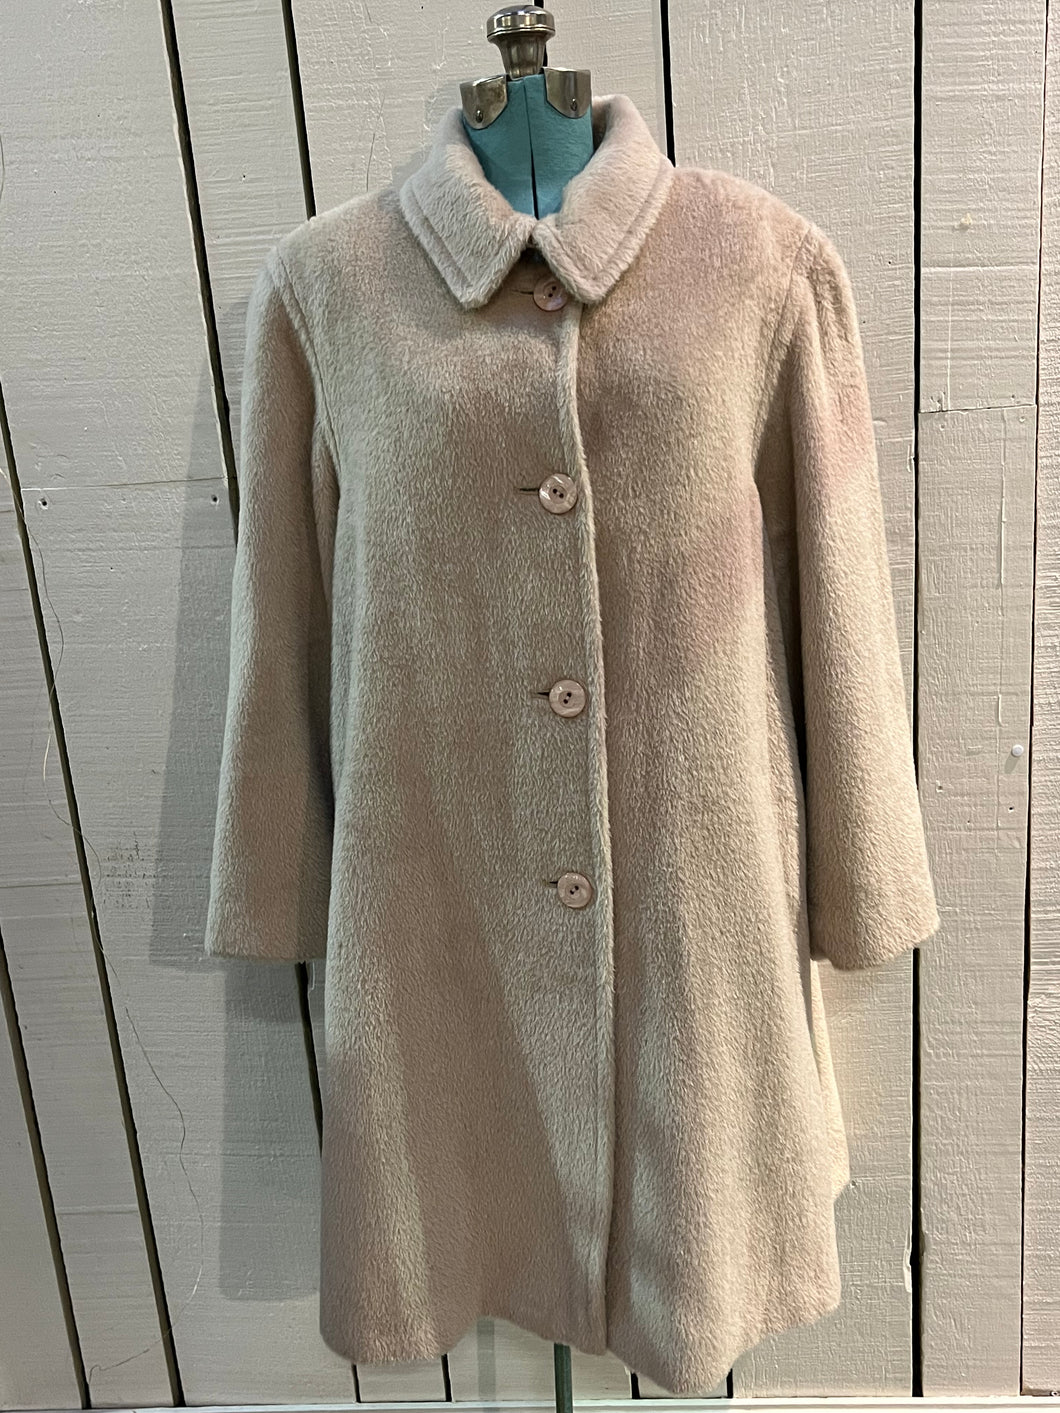 Vintage Mallia long baby lama blend (88% baby lama/ 12% wool) coat with button closures and two front pockets.

Union Made in Canada
Size 16